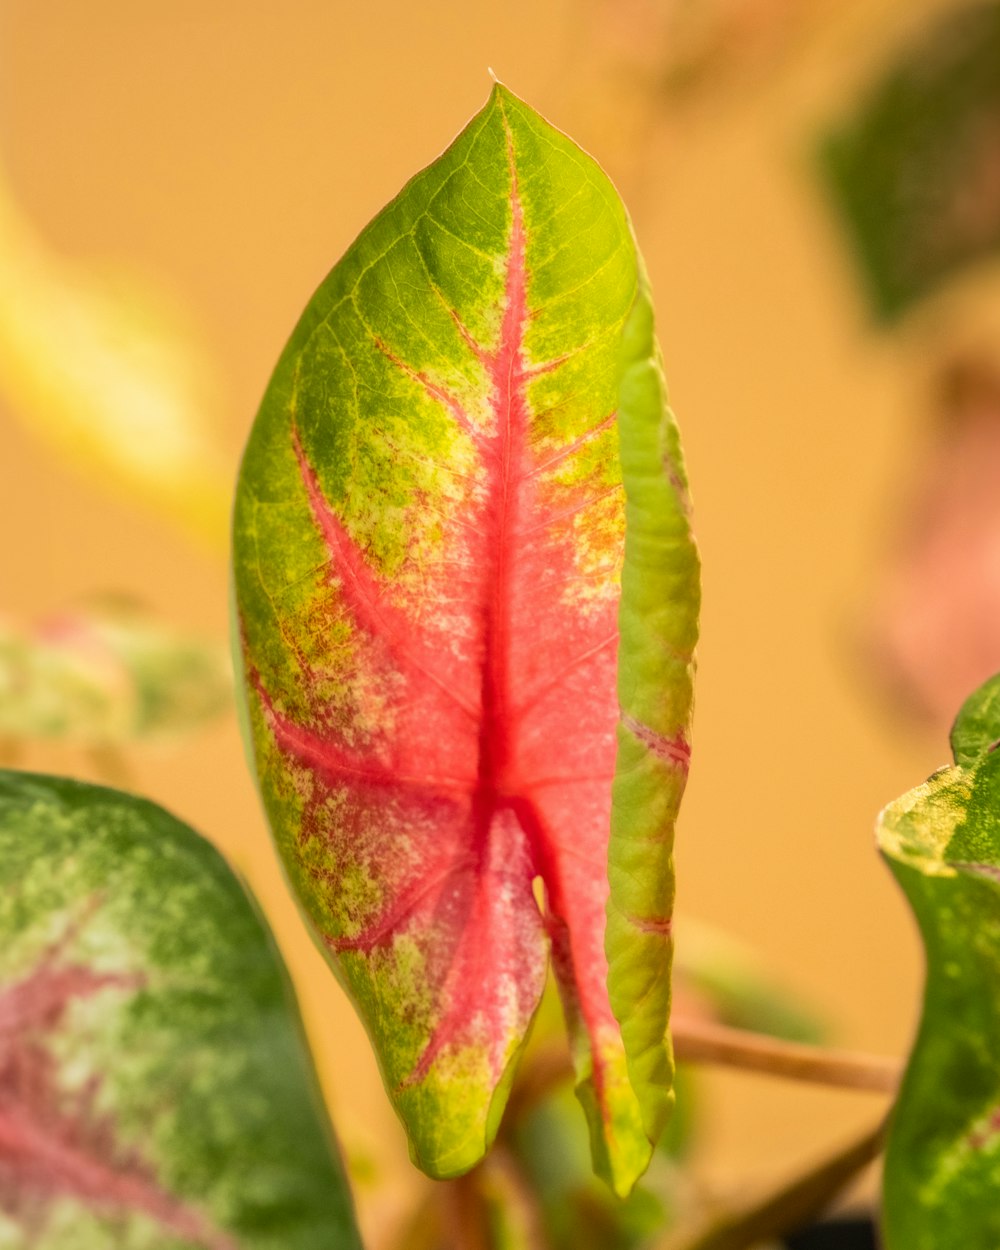 a close up of a green and red plant